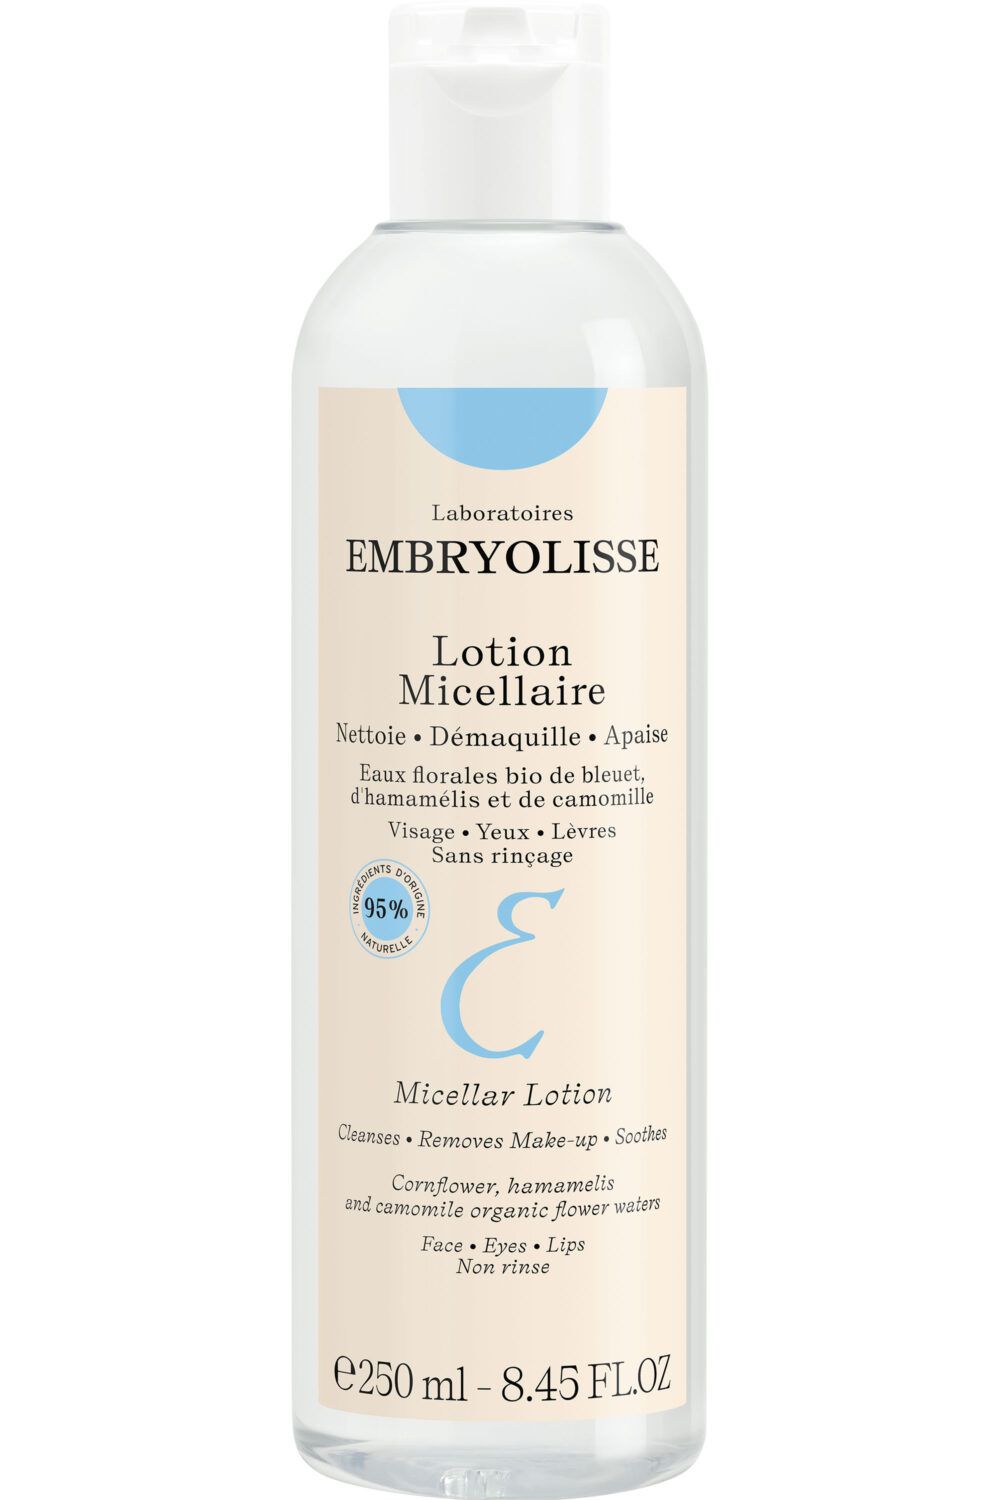 Embryolisse - Lotion micellaire